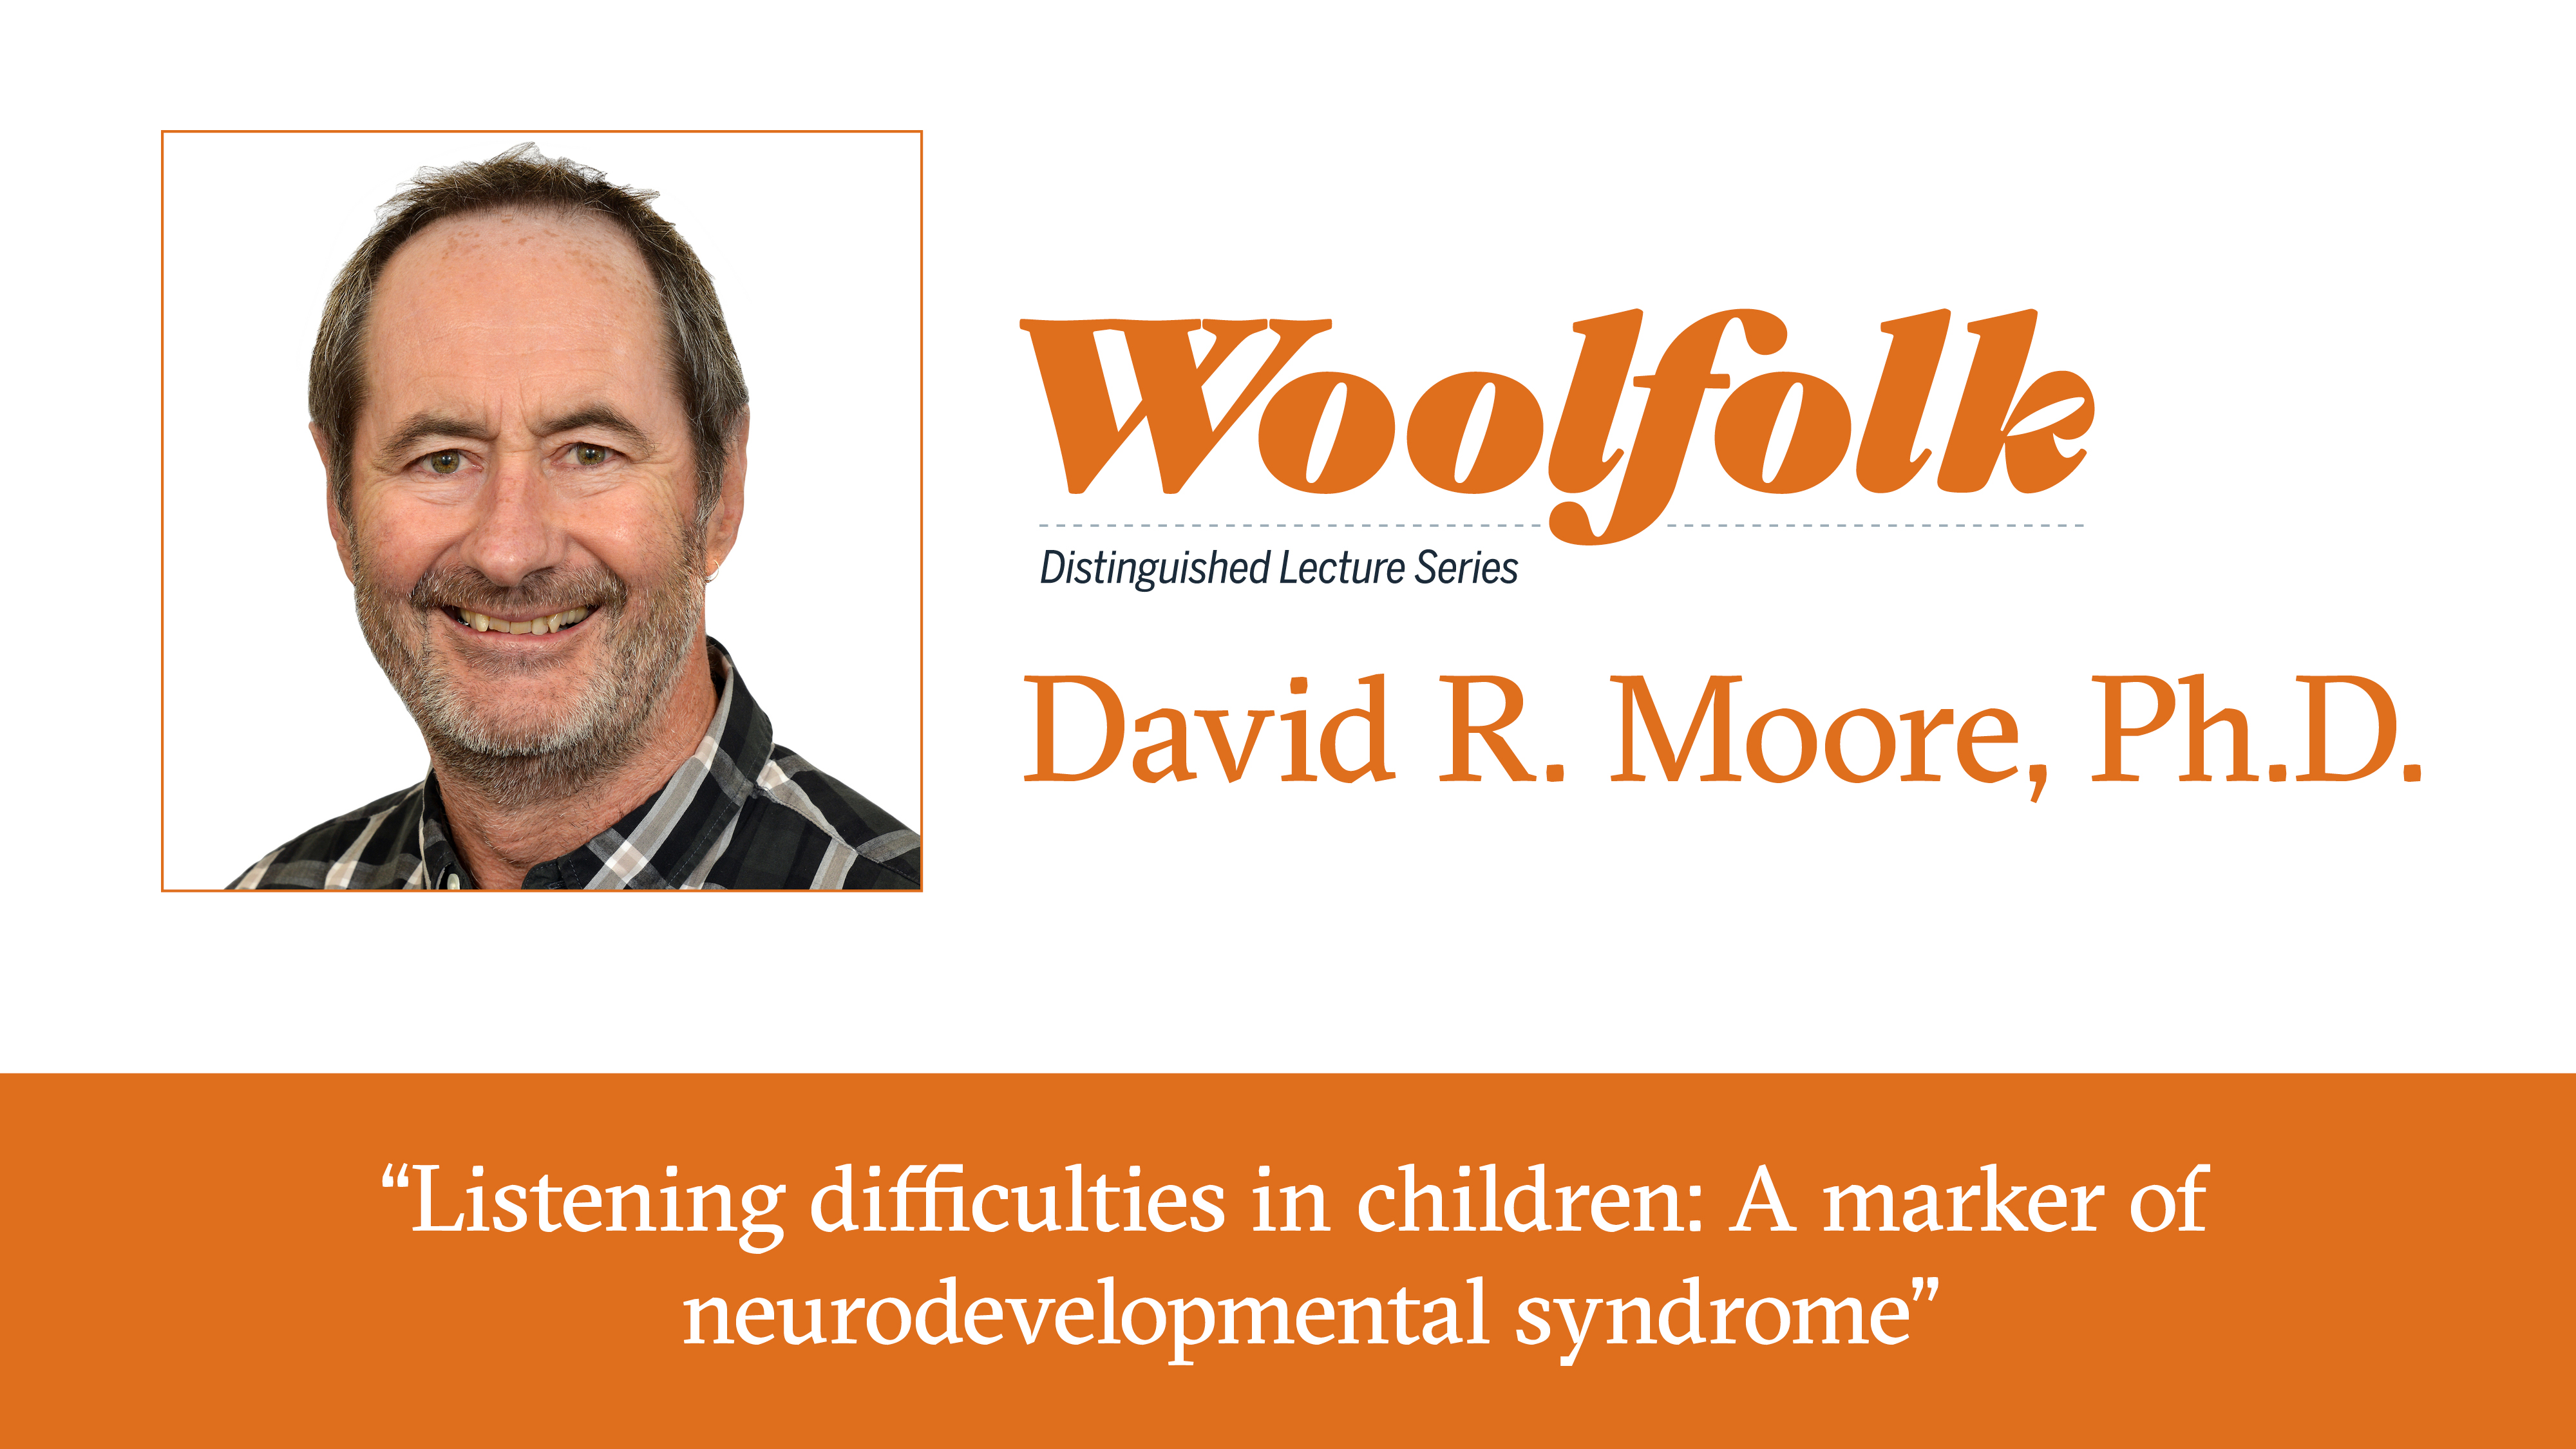 Woolfolk Distinguished Lecture Series; speaker: Dr. David R. Moore, Ph.D.; talk title "Listening difficulties in children: A marker of neurodevelopmental syndrome" (includes picture of speaker)